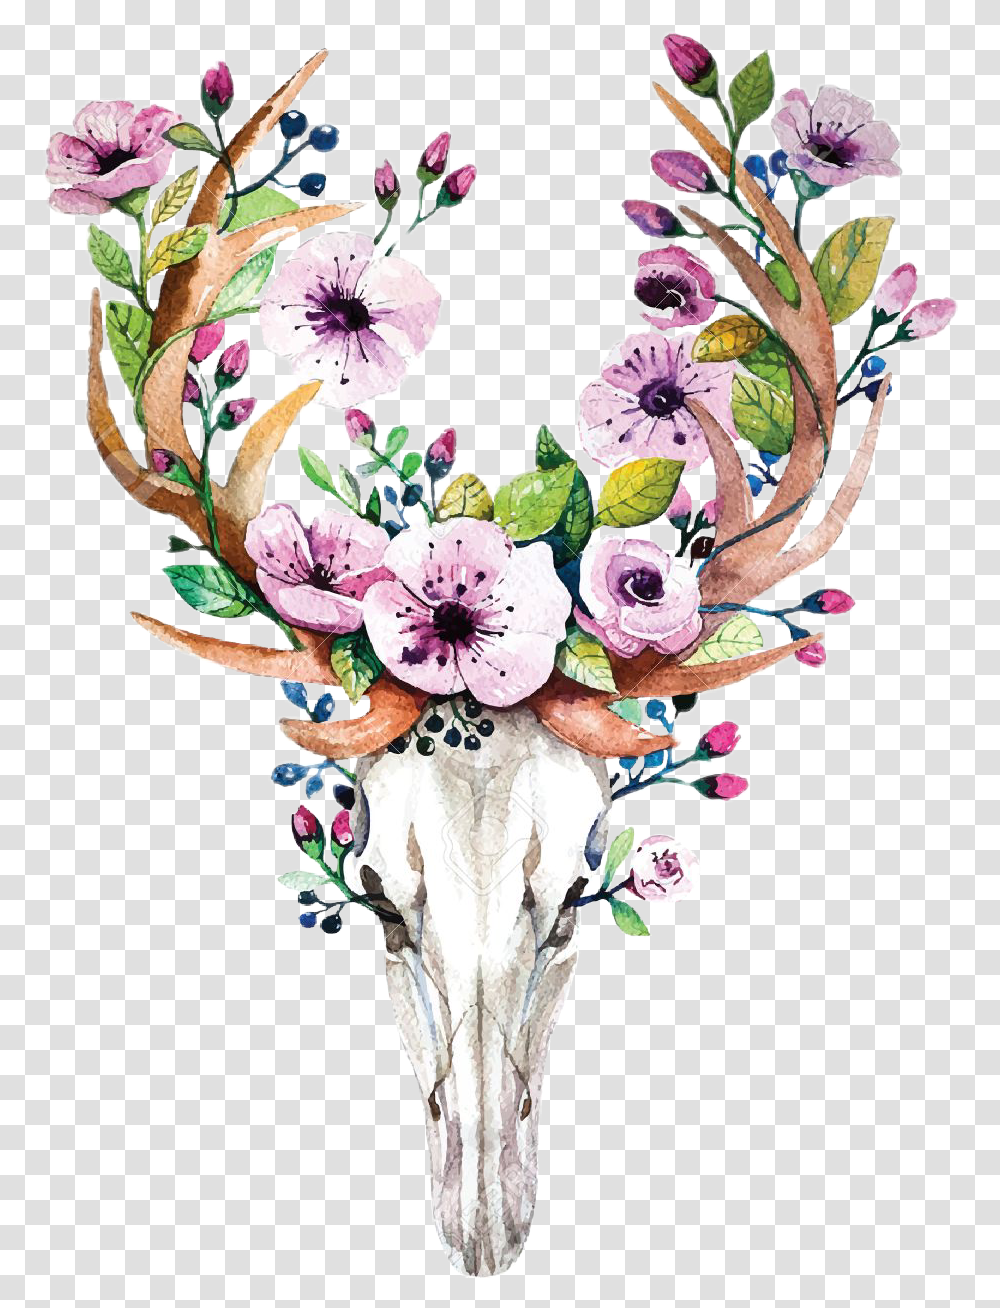 Report Abuse Deer Head With Flowers Full Size Watercolor Deer Skull With Flowers, Graphics, Art, Floral Design, Pattern Transparent Png